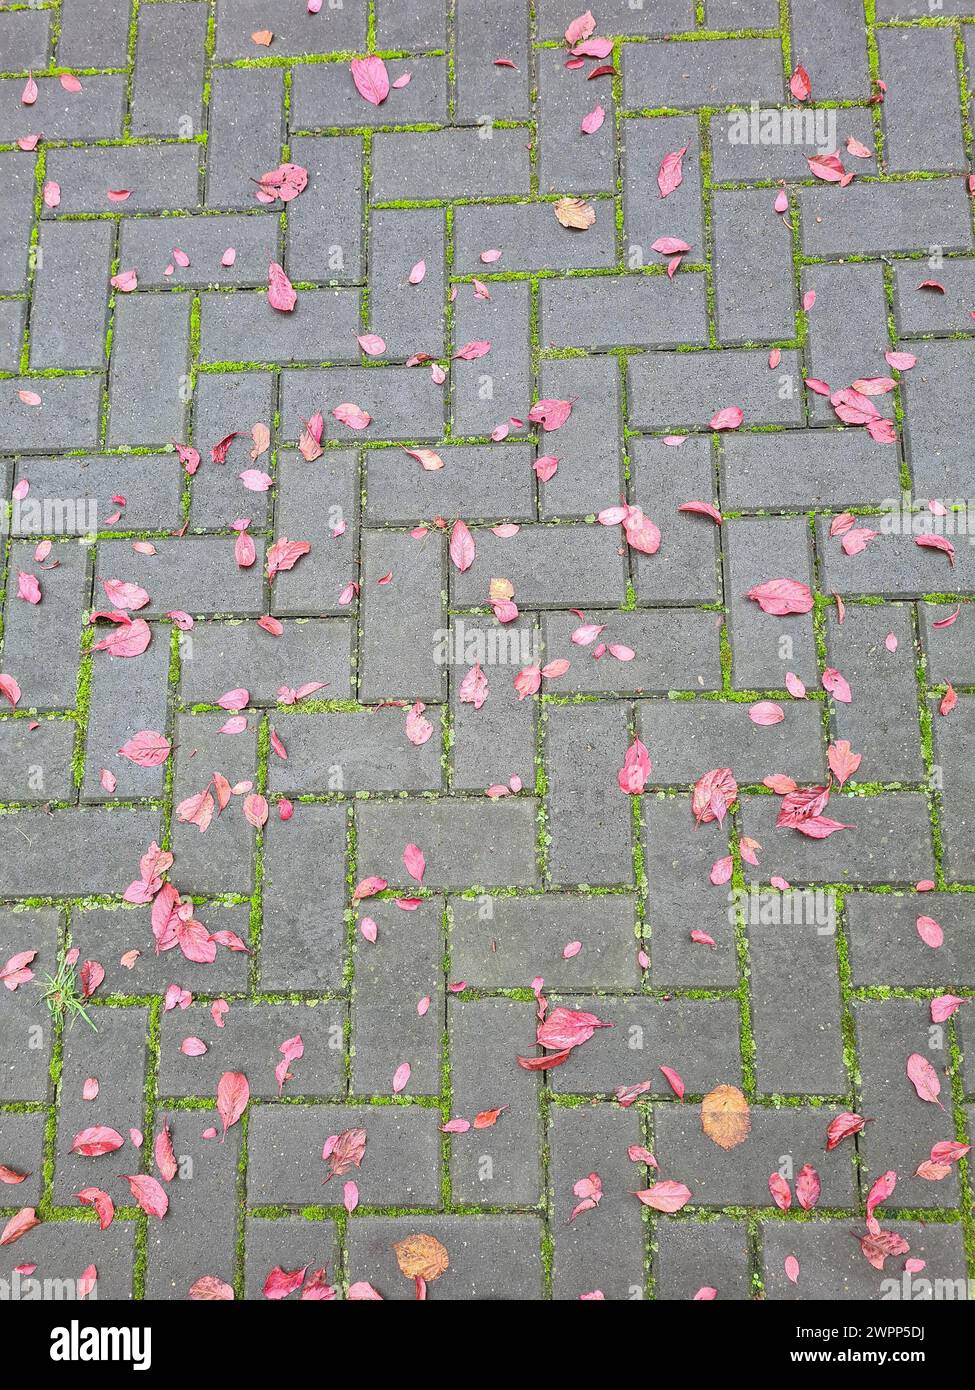 Various red autumn leaves from the Japanese plum tree have fallen onto the paving stones after a rain shower, joints overgrown with moss, Germany Stock Photo